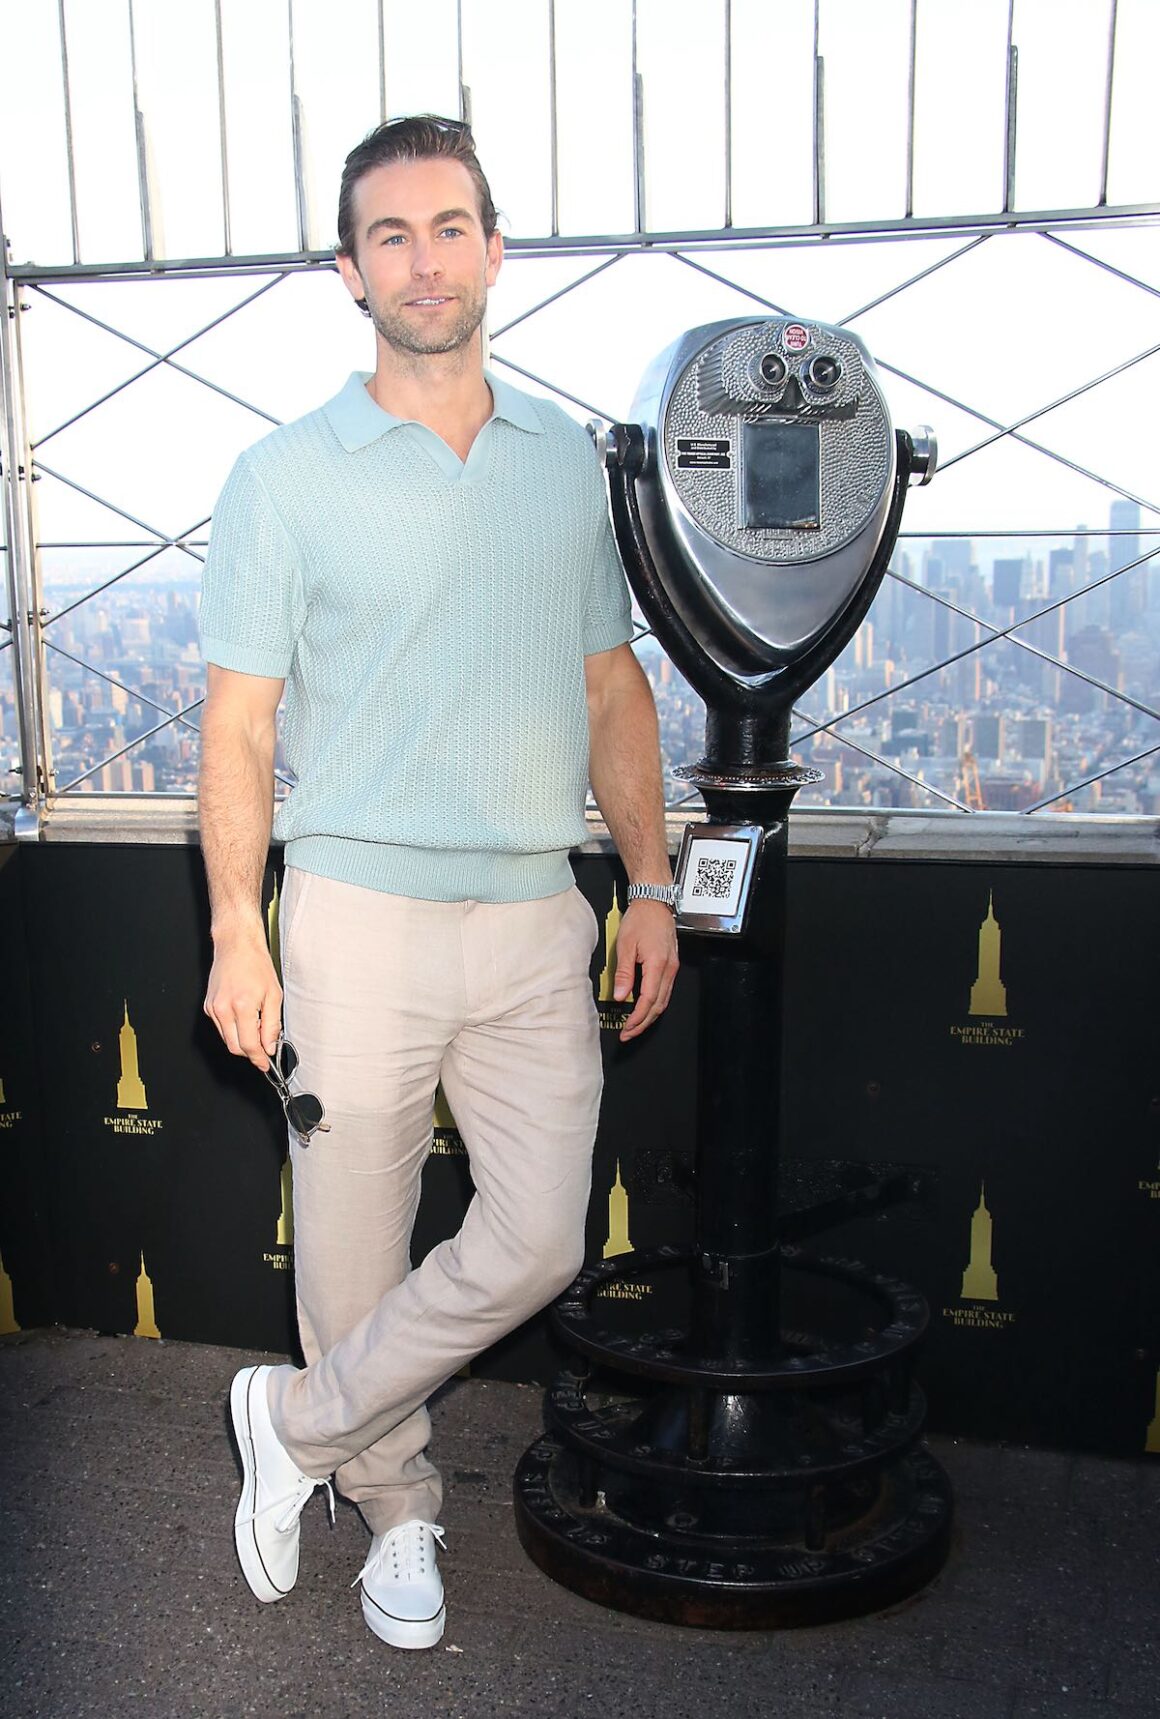 Cast of Prime Video's 'The Boys' Celebrate Season 4 at the Empire State Building